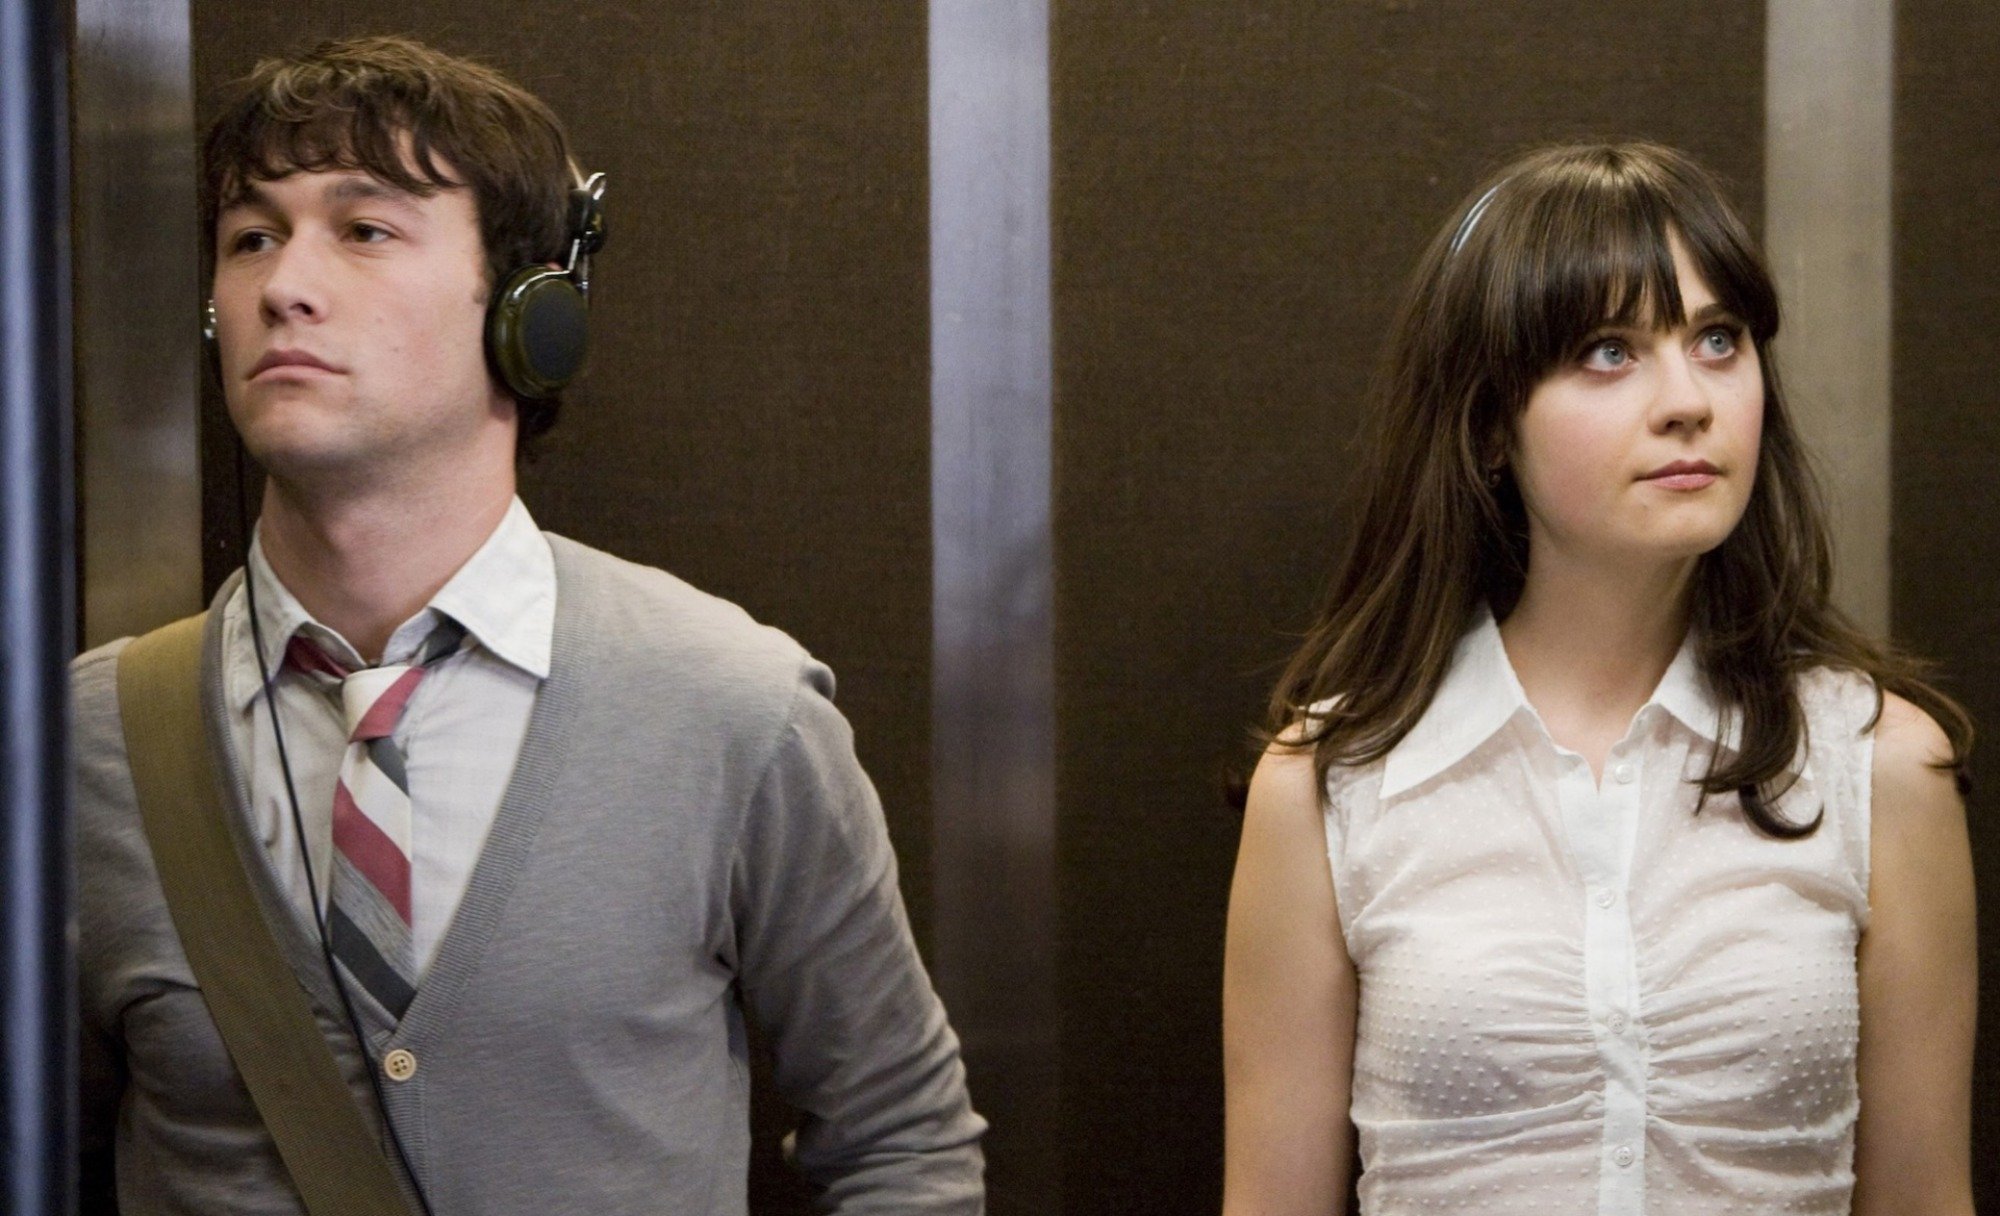 A man and woman standing in an elevator and looking away from each other; Joseph Gordon-Levitt and Zoeey Deschanel in "500 Days of Summer."